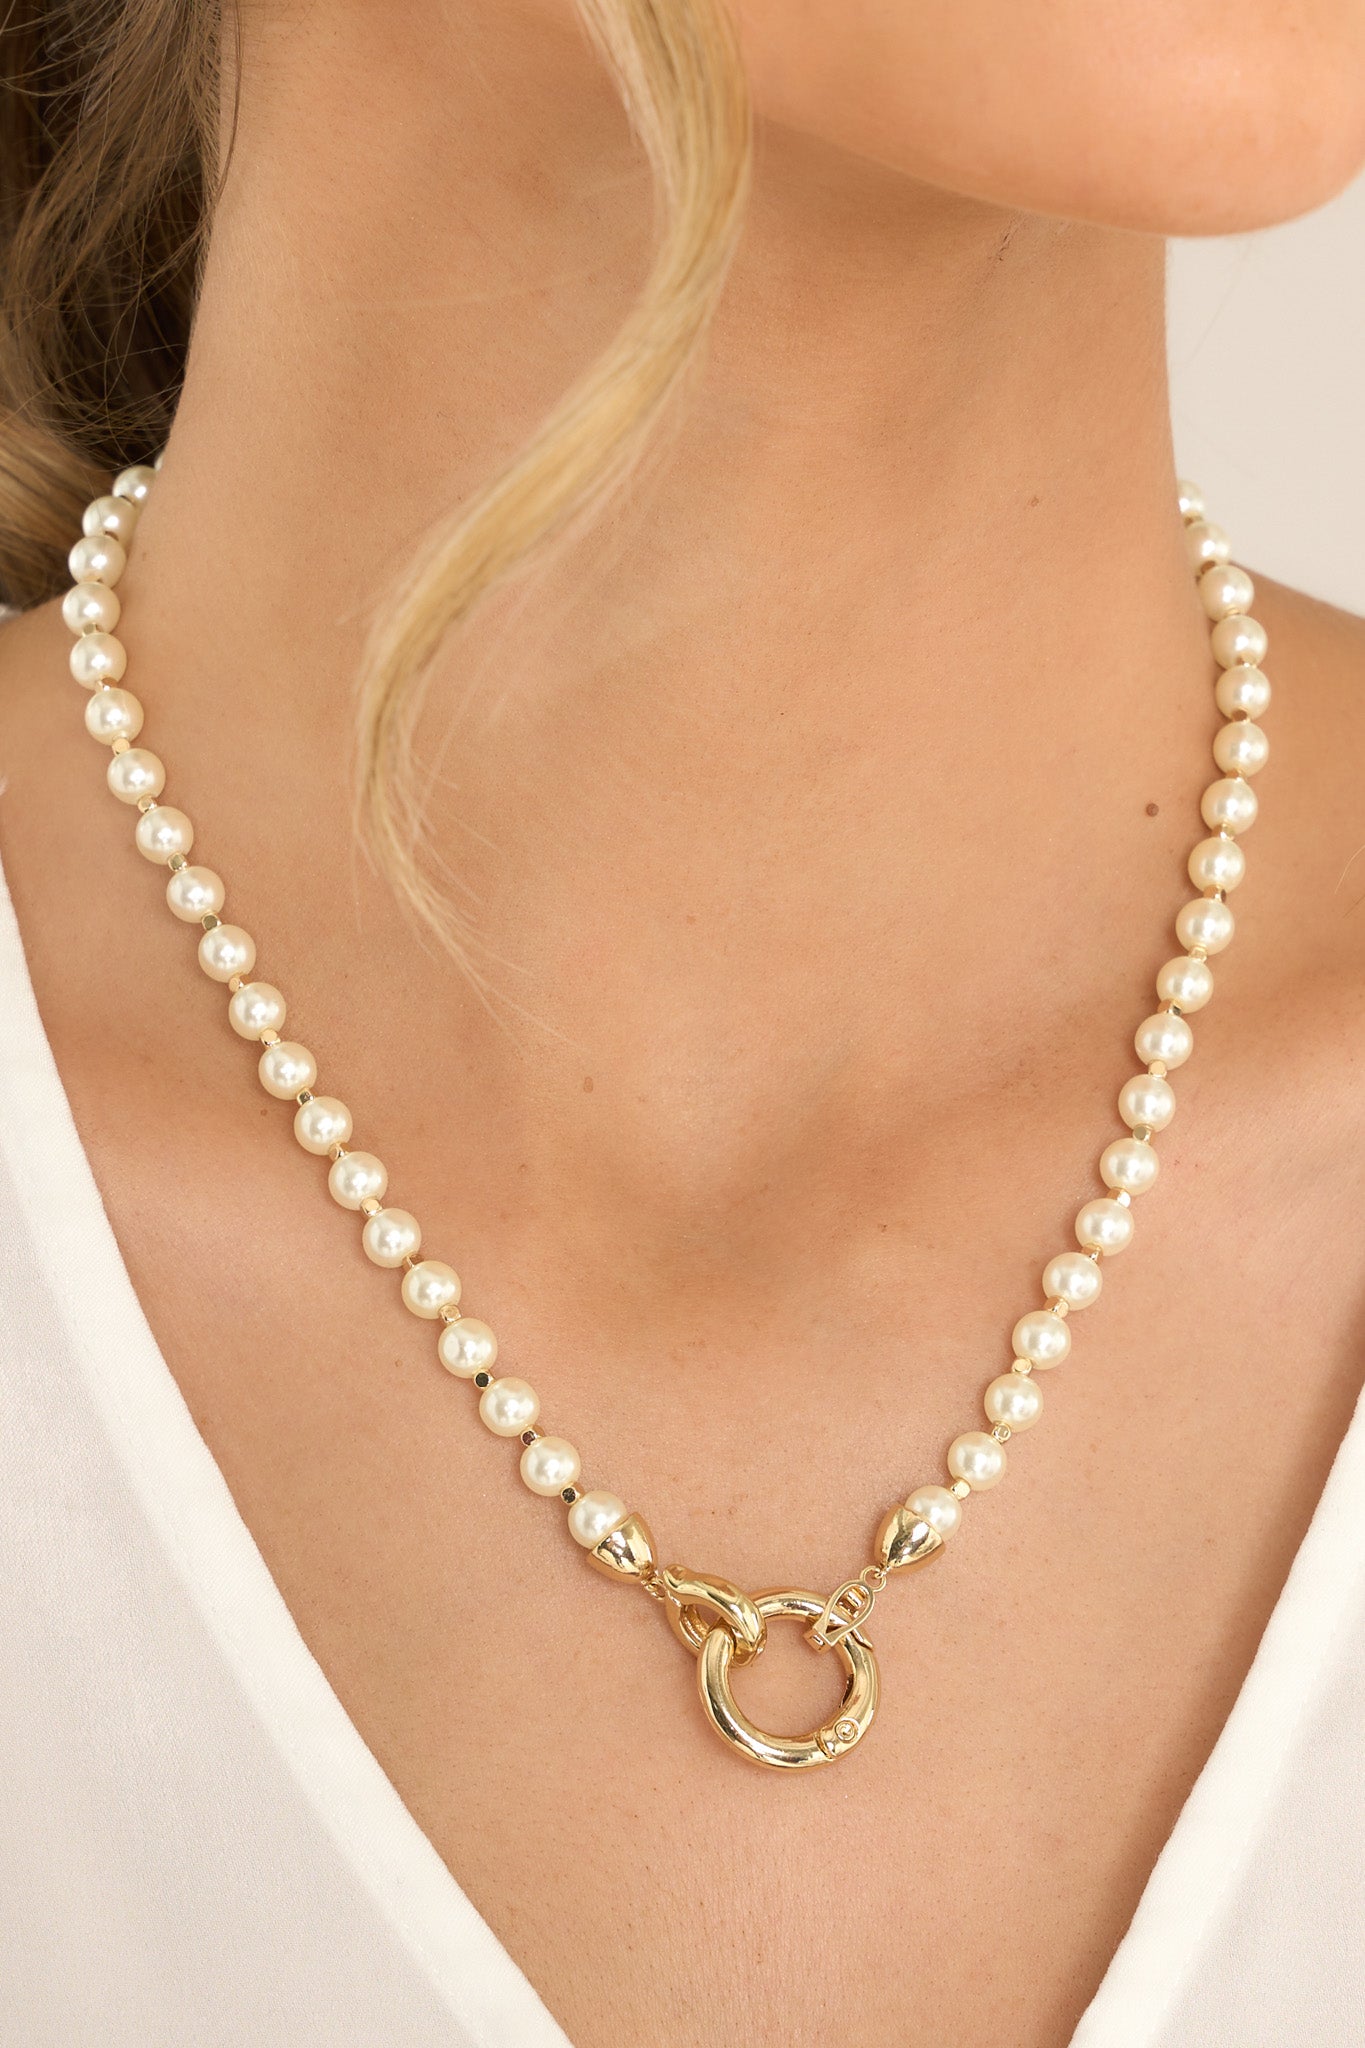 This gold and pearl necklace features faux pearls, gold hardware, functional clap pendants, and a lobster claw closure. 